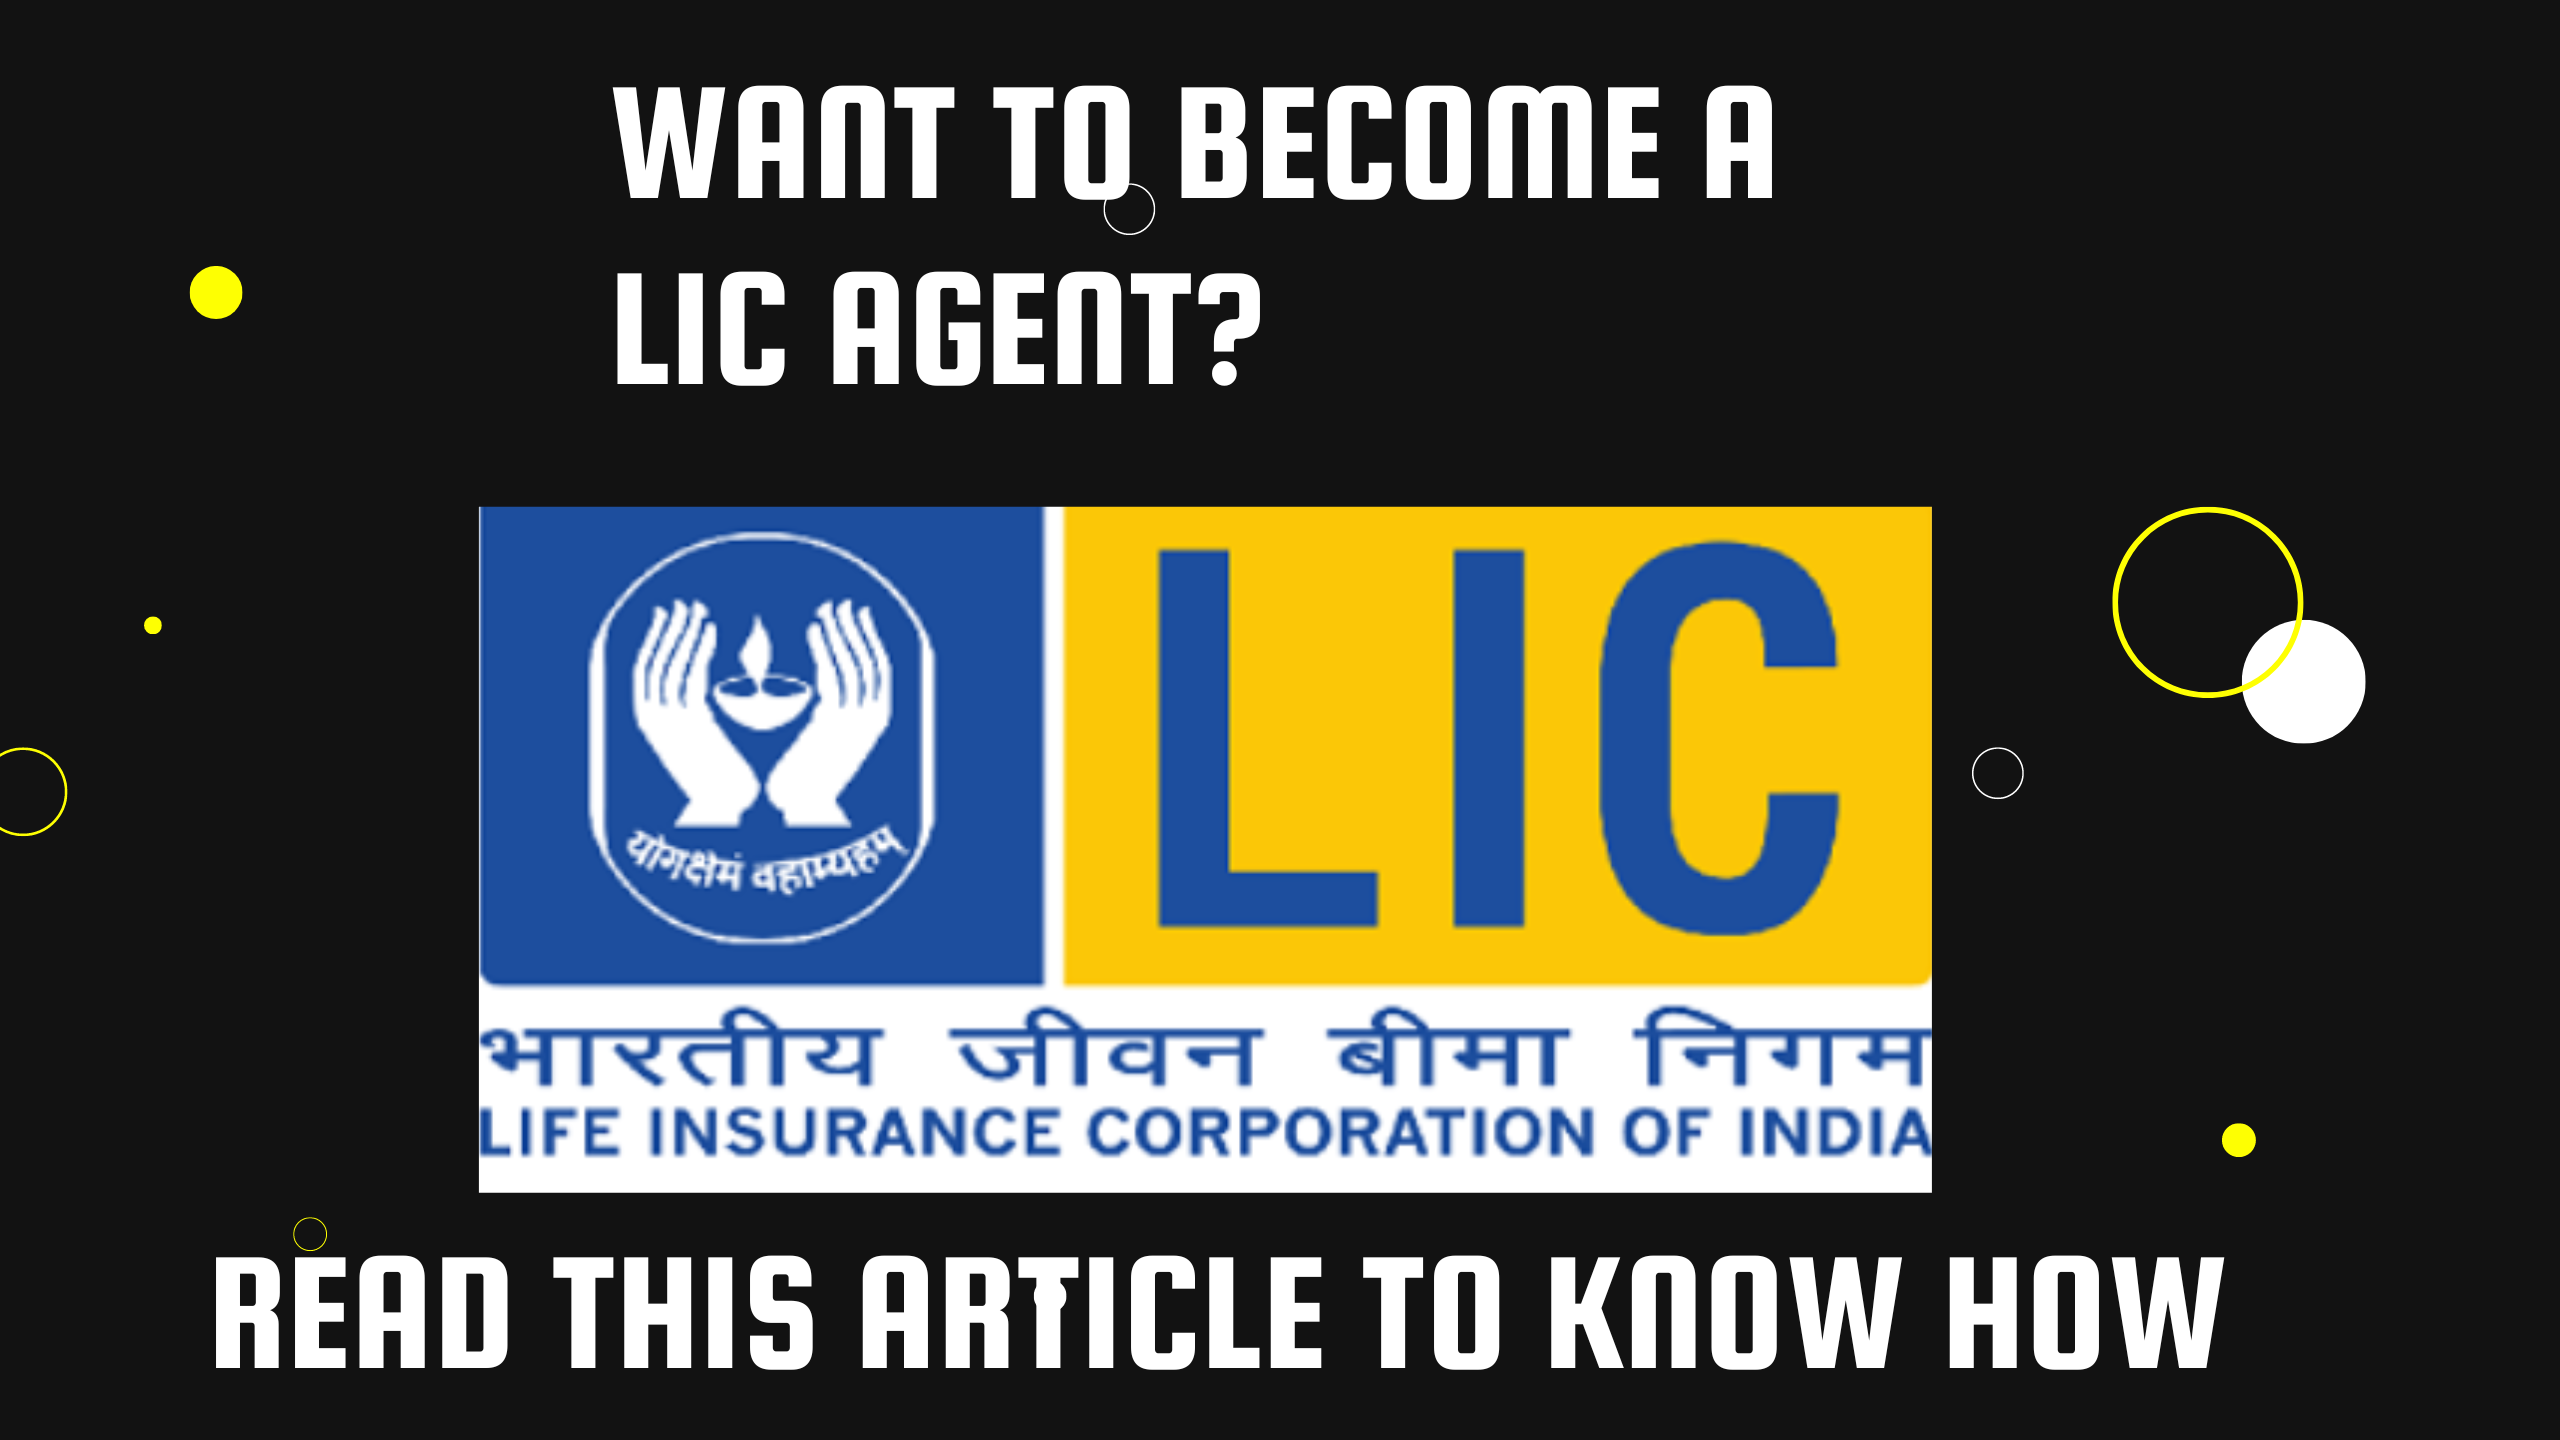 How to become a lic agent